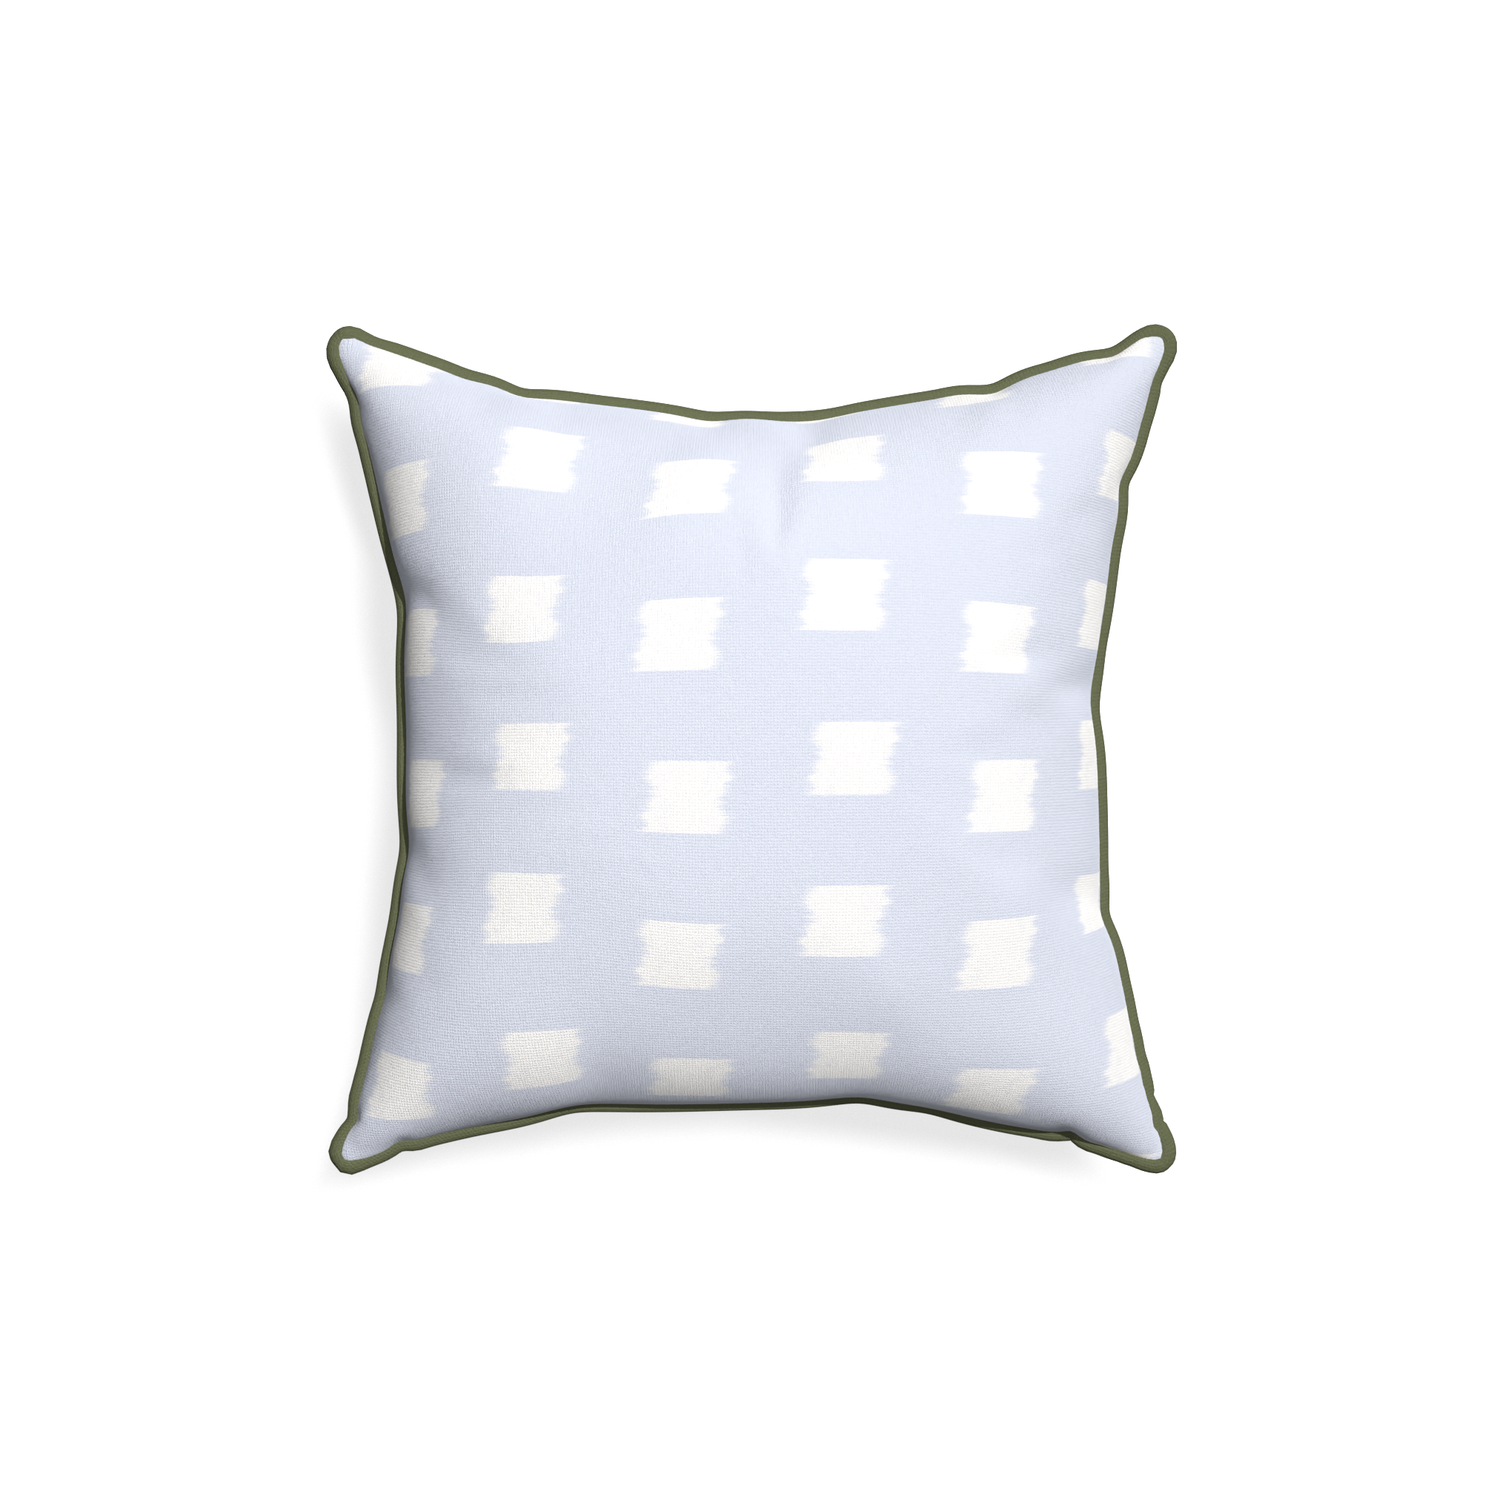 18-square denton custom sky blue patternpillow with f piping on white background